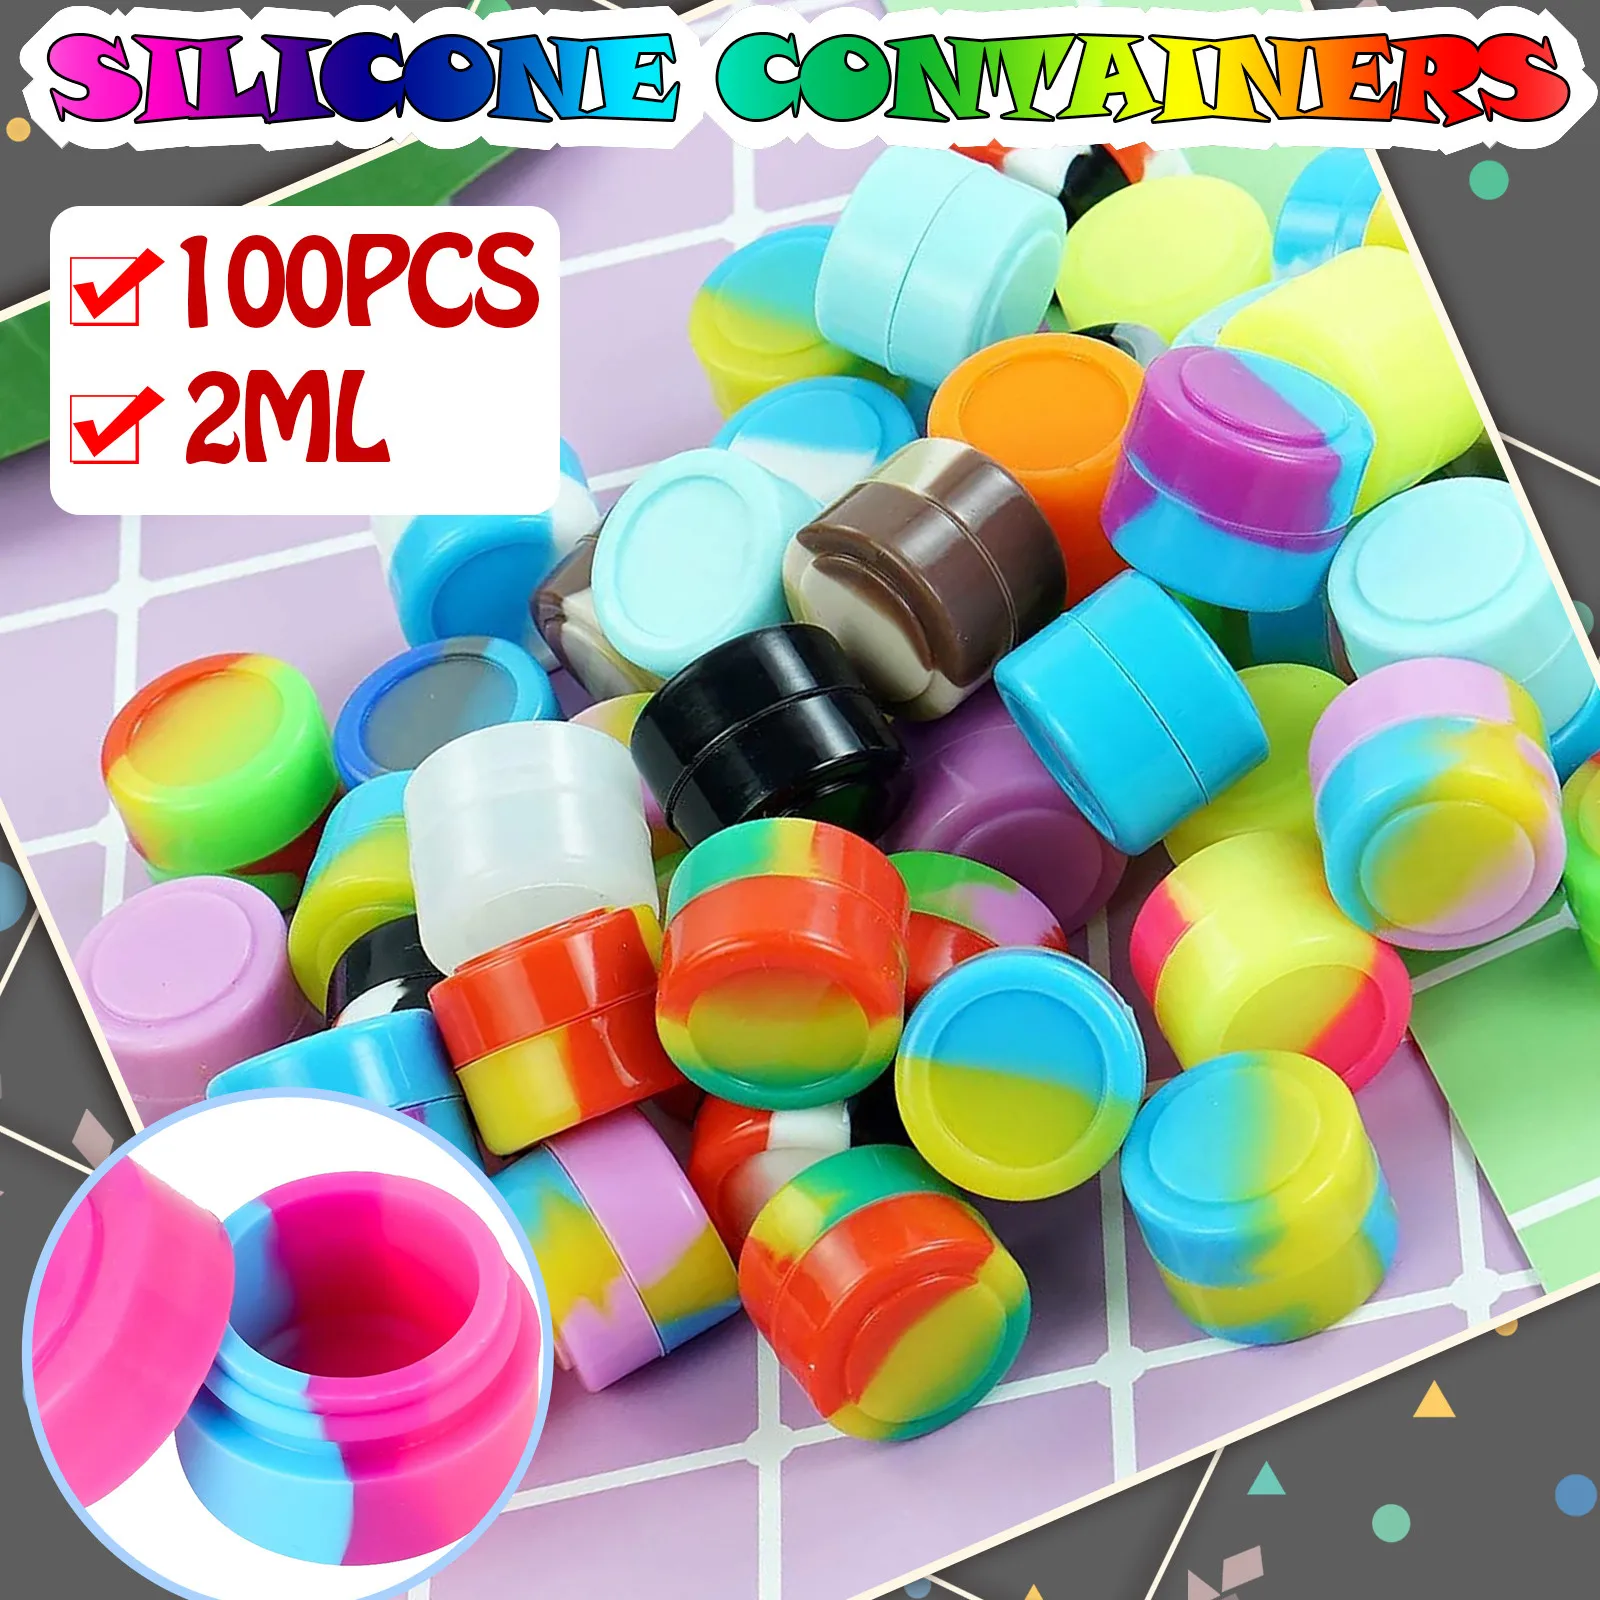 

100pcs 2ml Mini Round Non-stick Silicone Container For Wax Bho Oil Butane Vaporizer Silicon Jars Dab Wax Container Wax Jars